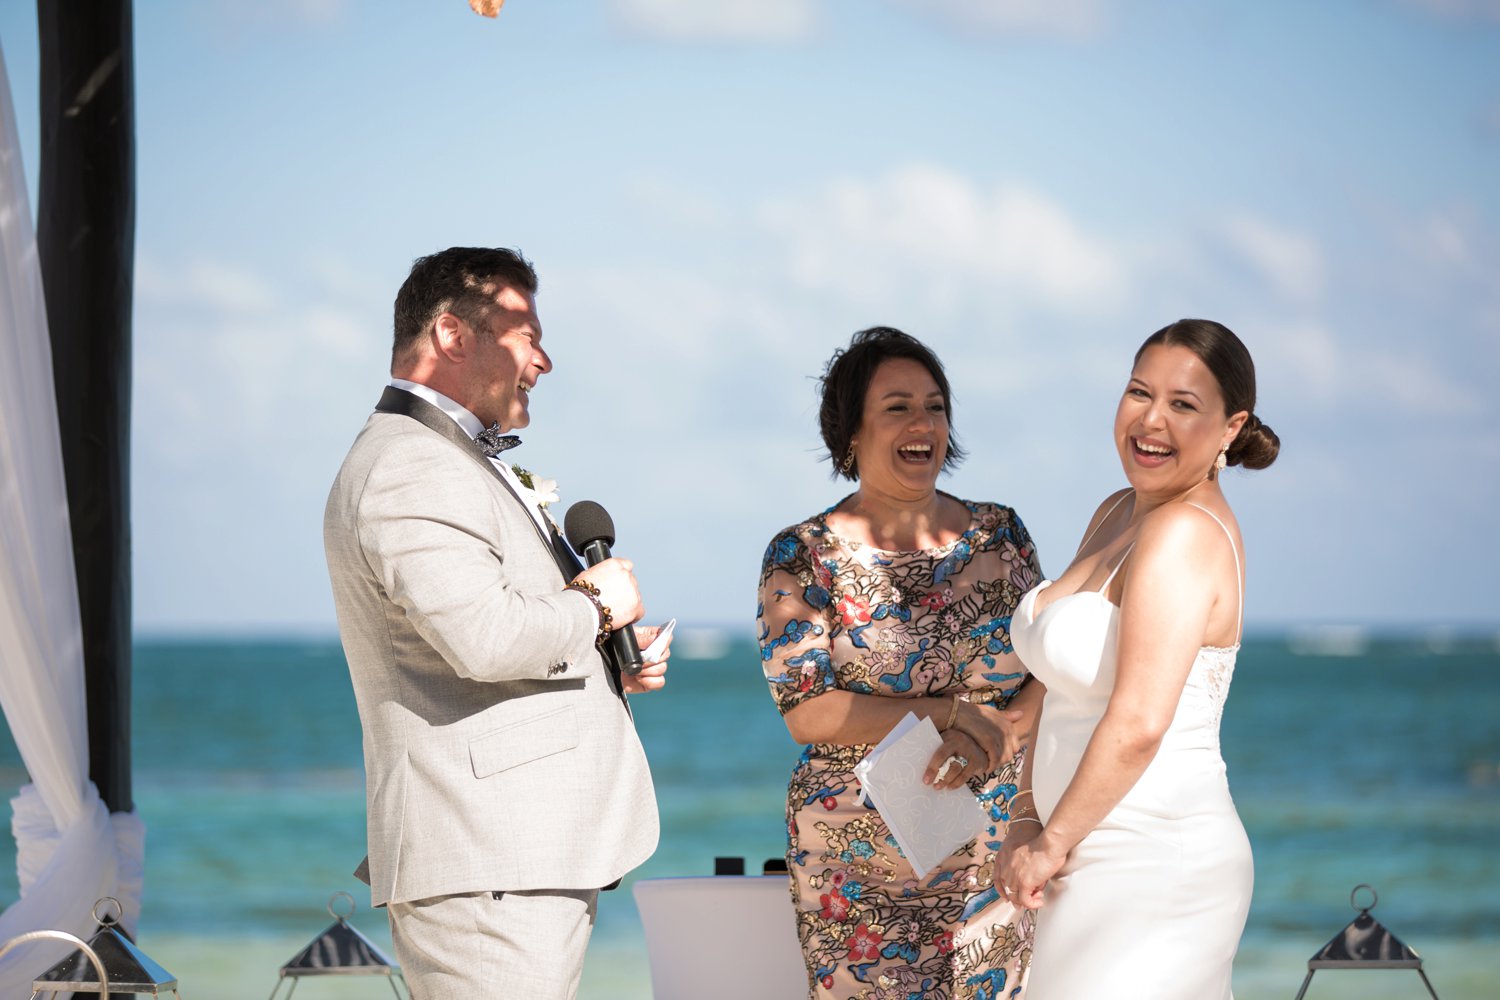  images by feliciathephotographer.com | destination wedding photographer | mexico | tropical | fiji | venue | azul beach resort | riviera maya | ceremony | oceanside | blue water | grey suit | white sheath gown | laughter | exchanging vows | joy | jaehee bridal atelier | 